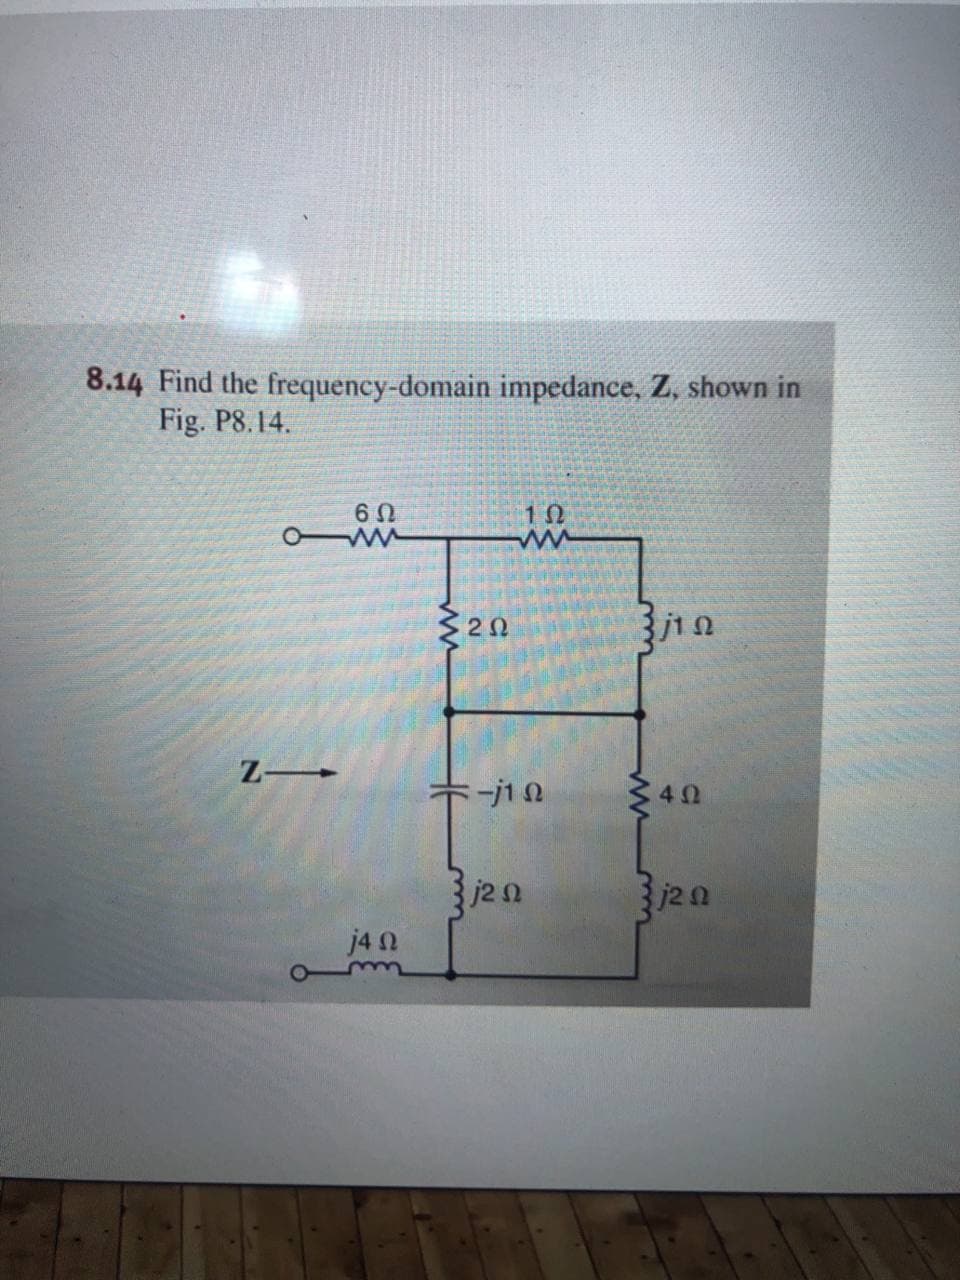 8.14 Find the frequency-domain impedance, Z, shown in
Fig. P8.14.
6 0
10
j2n
j4 0
